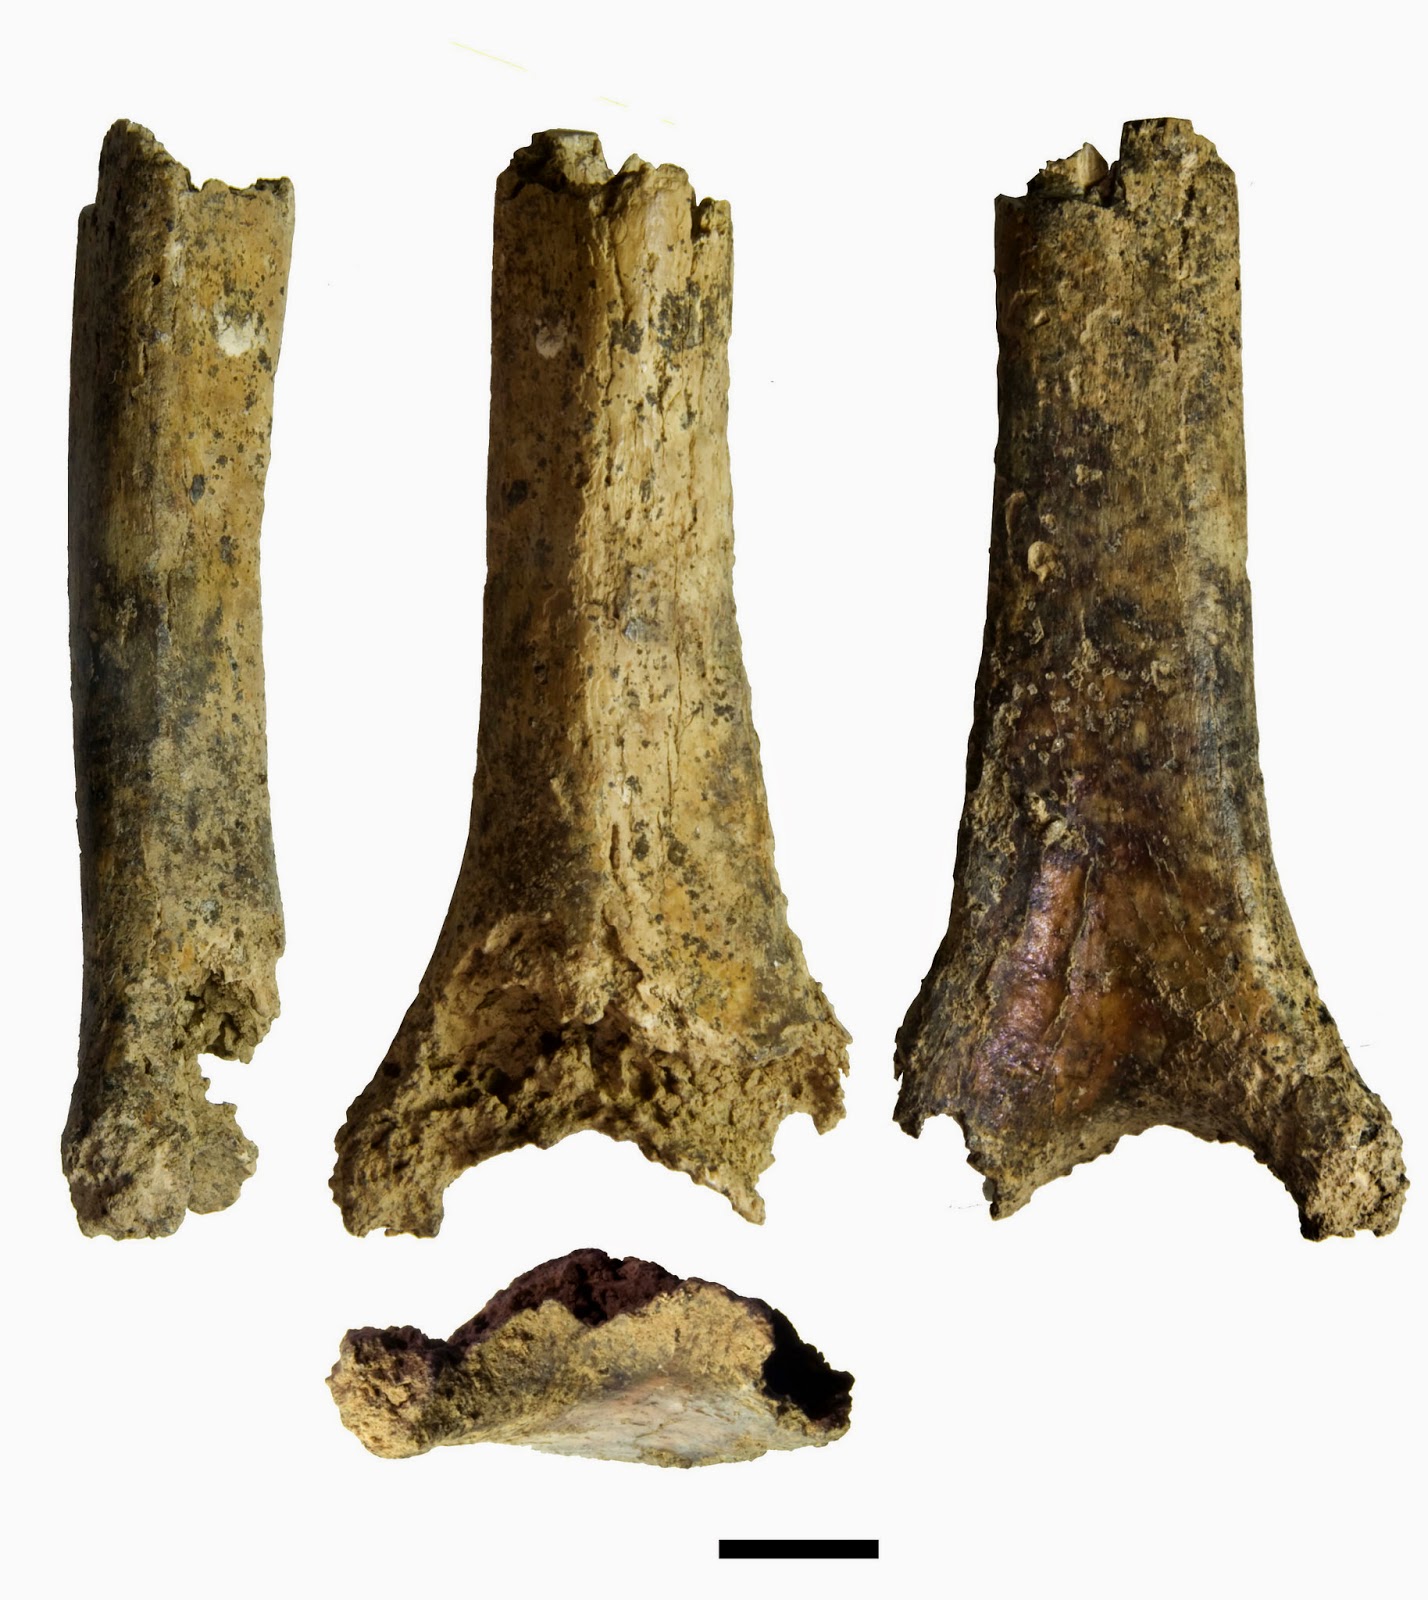 Neanderthal mandible and humerus found in the Cova del Gegant in Sitges